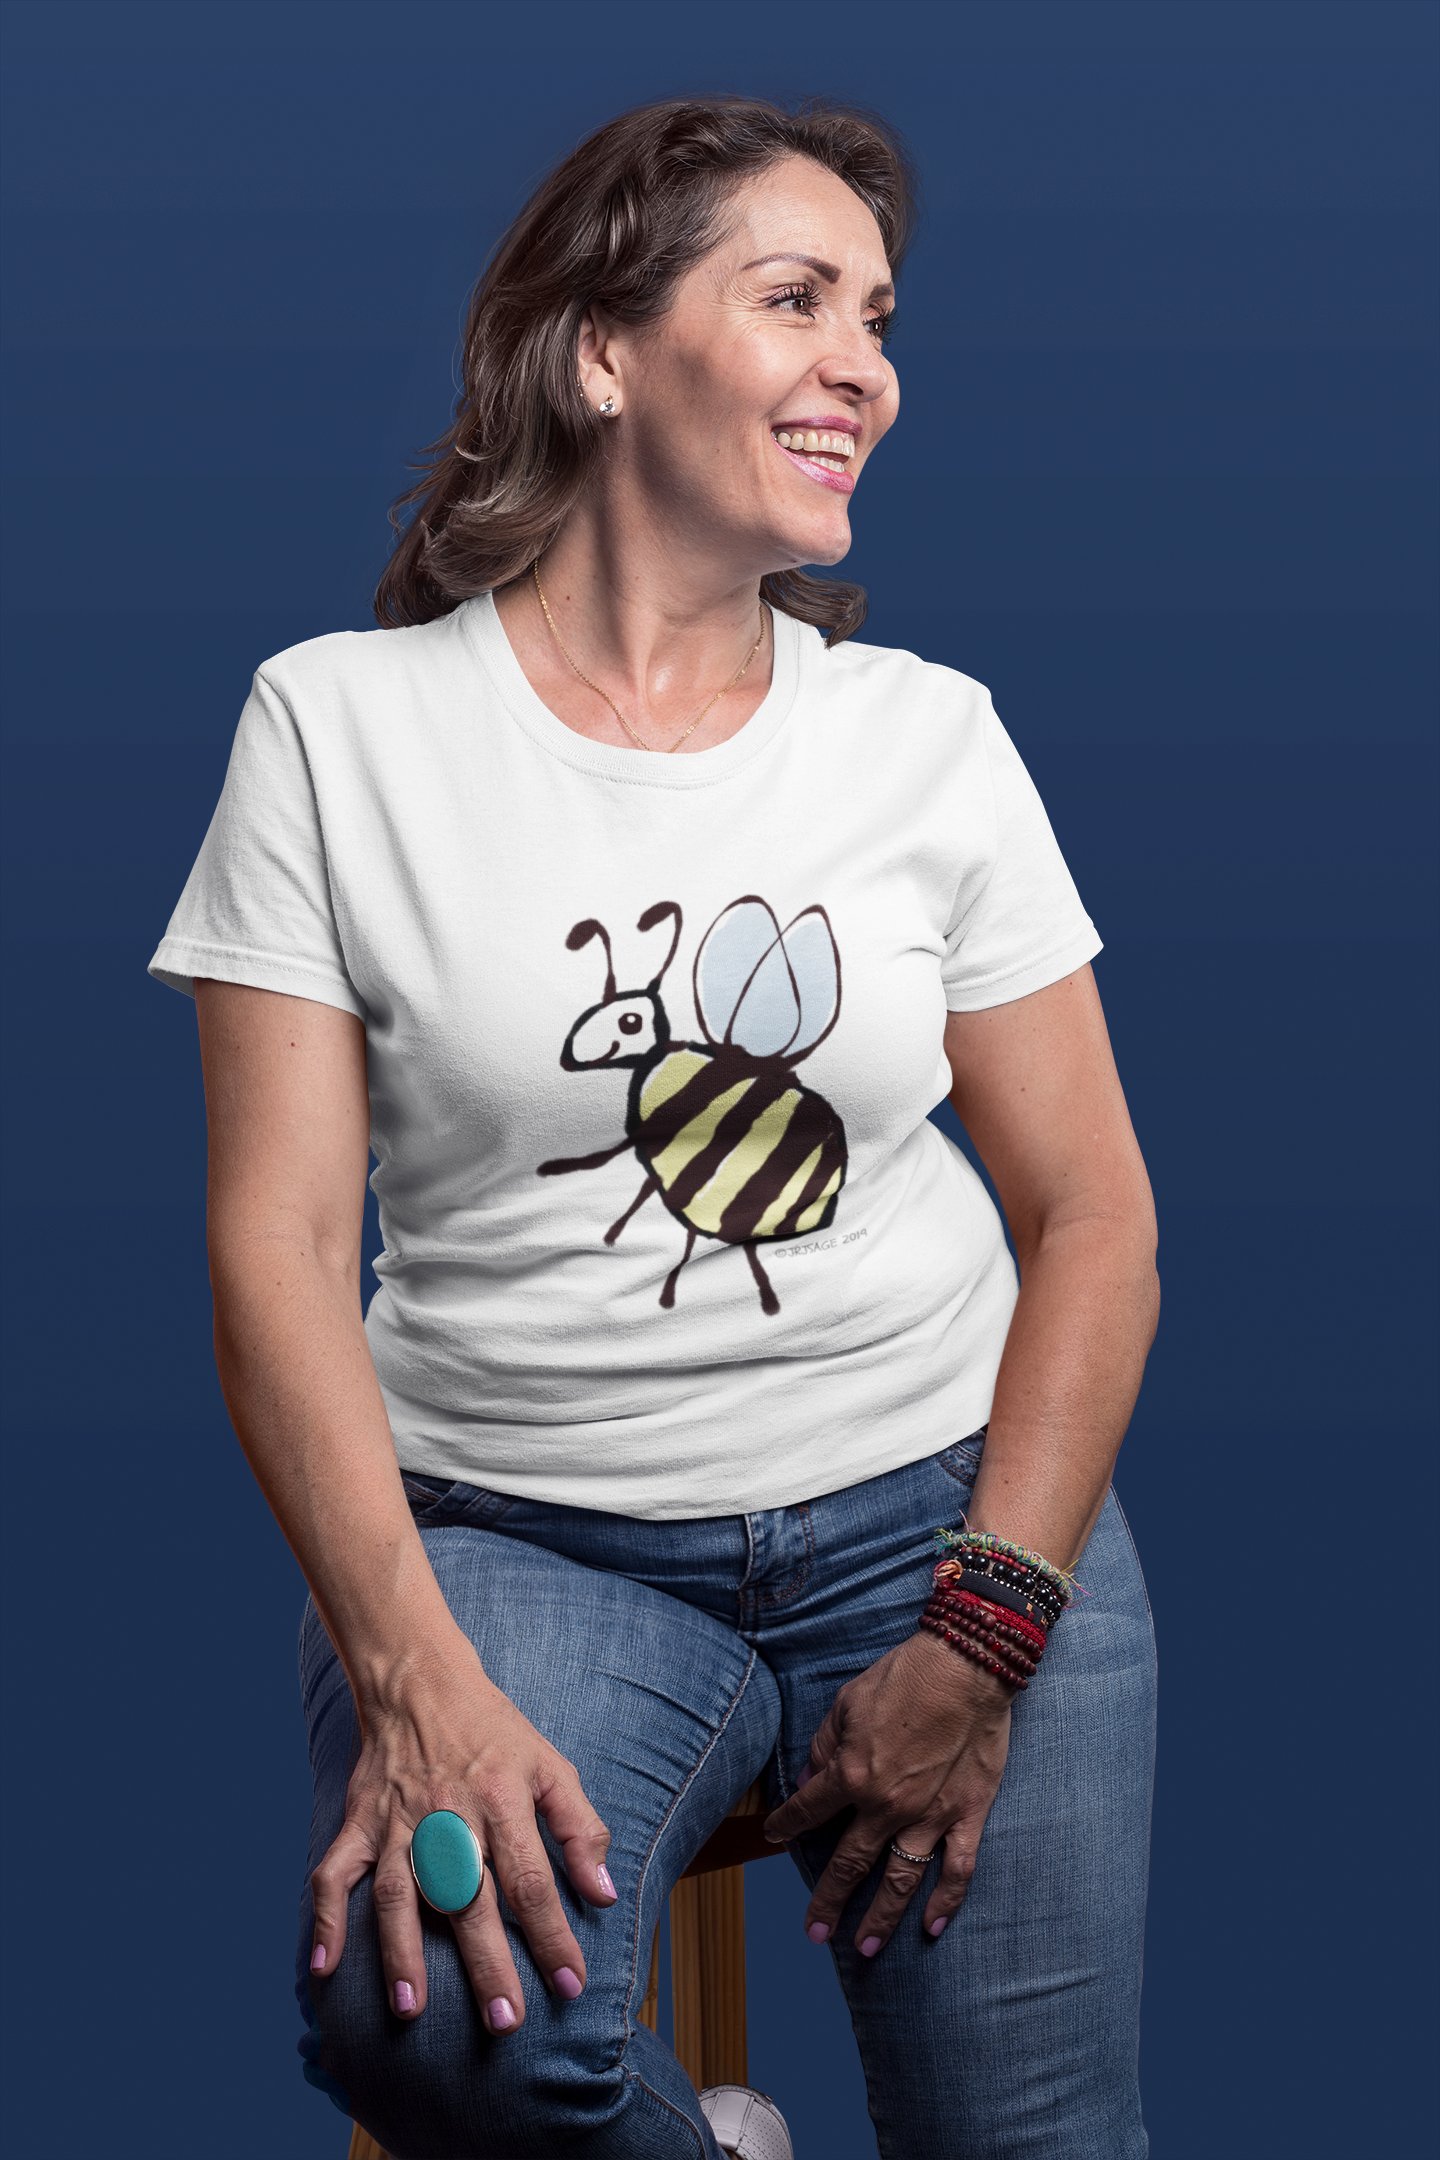 Bee T-shirt - Woman wearing a cute Busy Bee illustrated white vegan cotton t-shirts by Hector and Bone